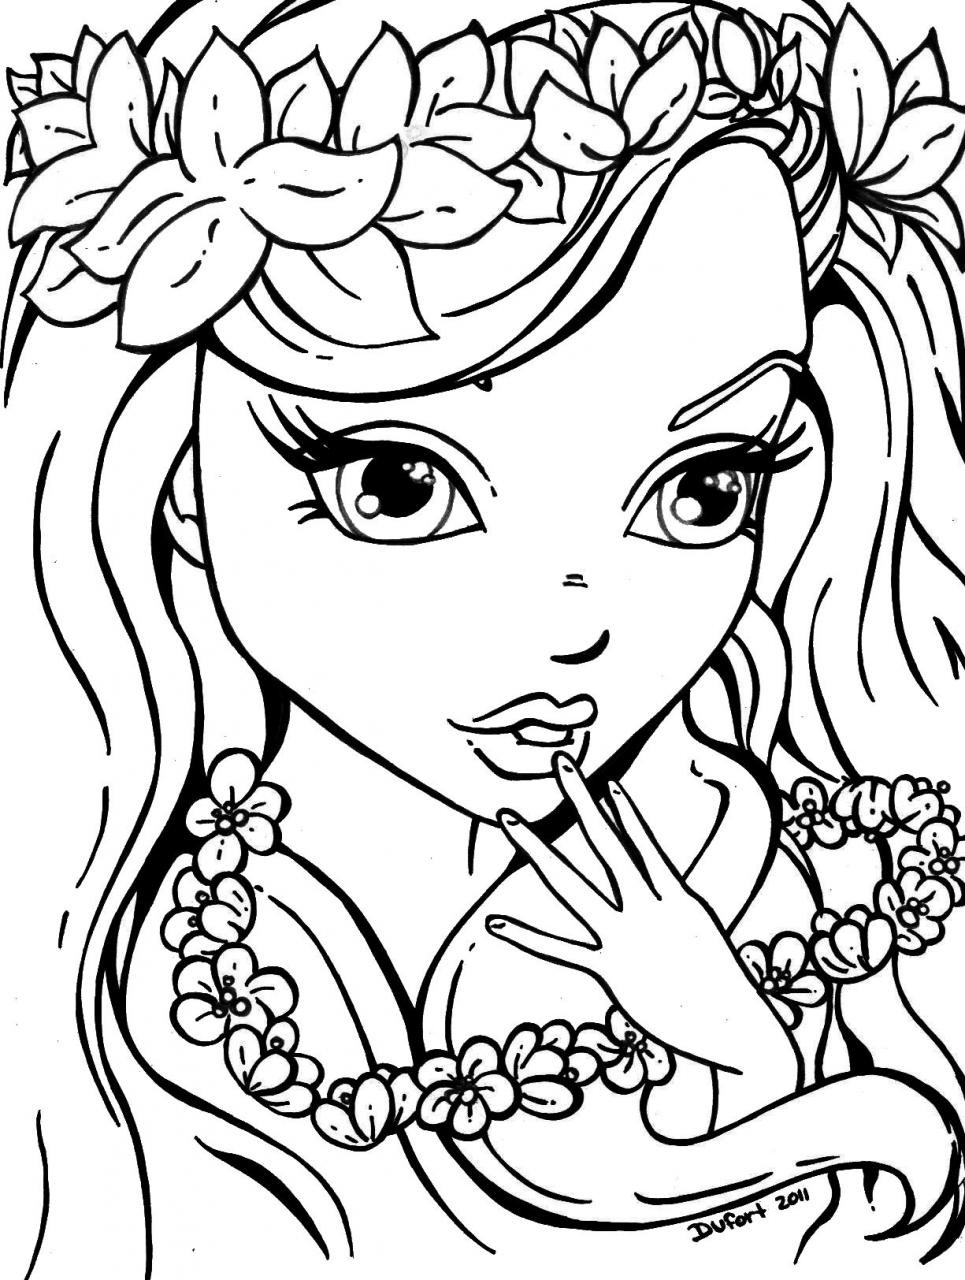 Coloring Sheets For Girls To Print Out
 Lisa Frank Girl Coloring Pages Printable Coloring Page For